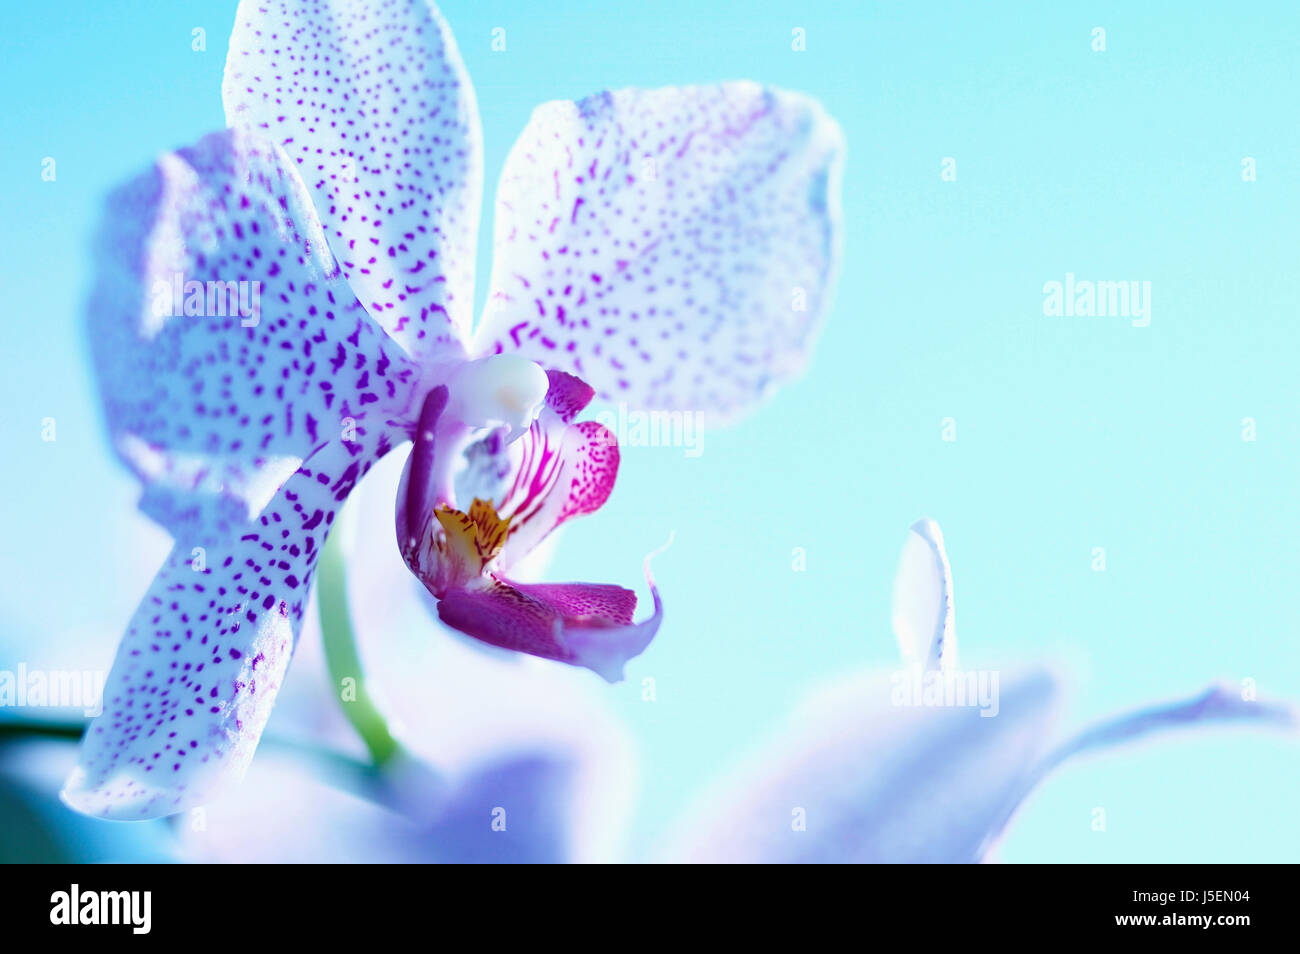 Orchid, Moth orchid, Phalaenopsis, Studio shot offlower against blue background. Stock Photo